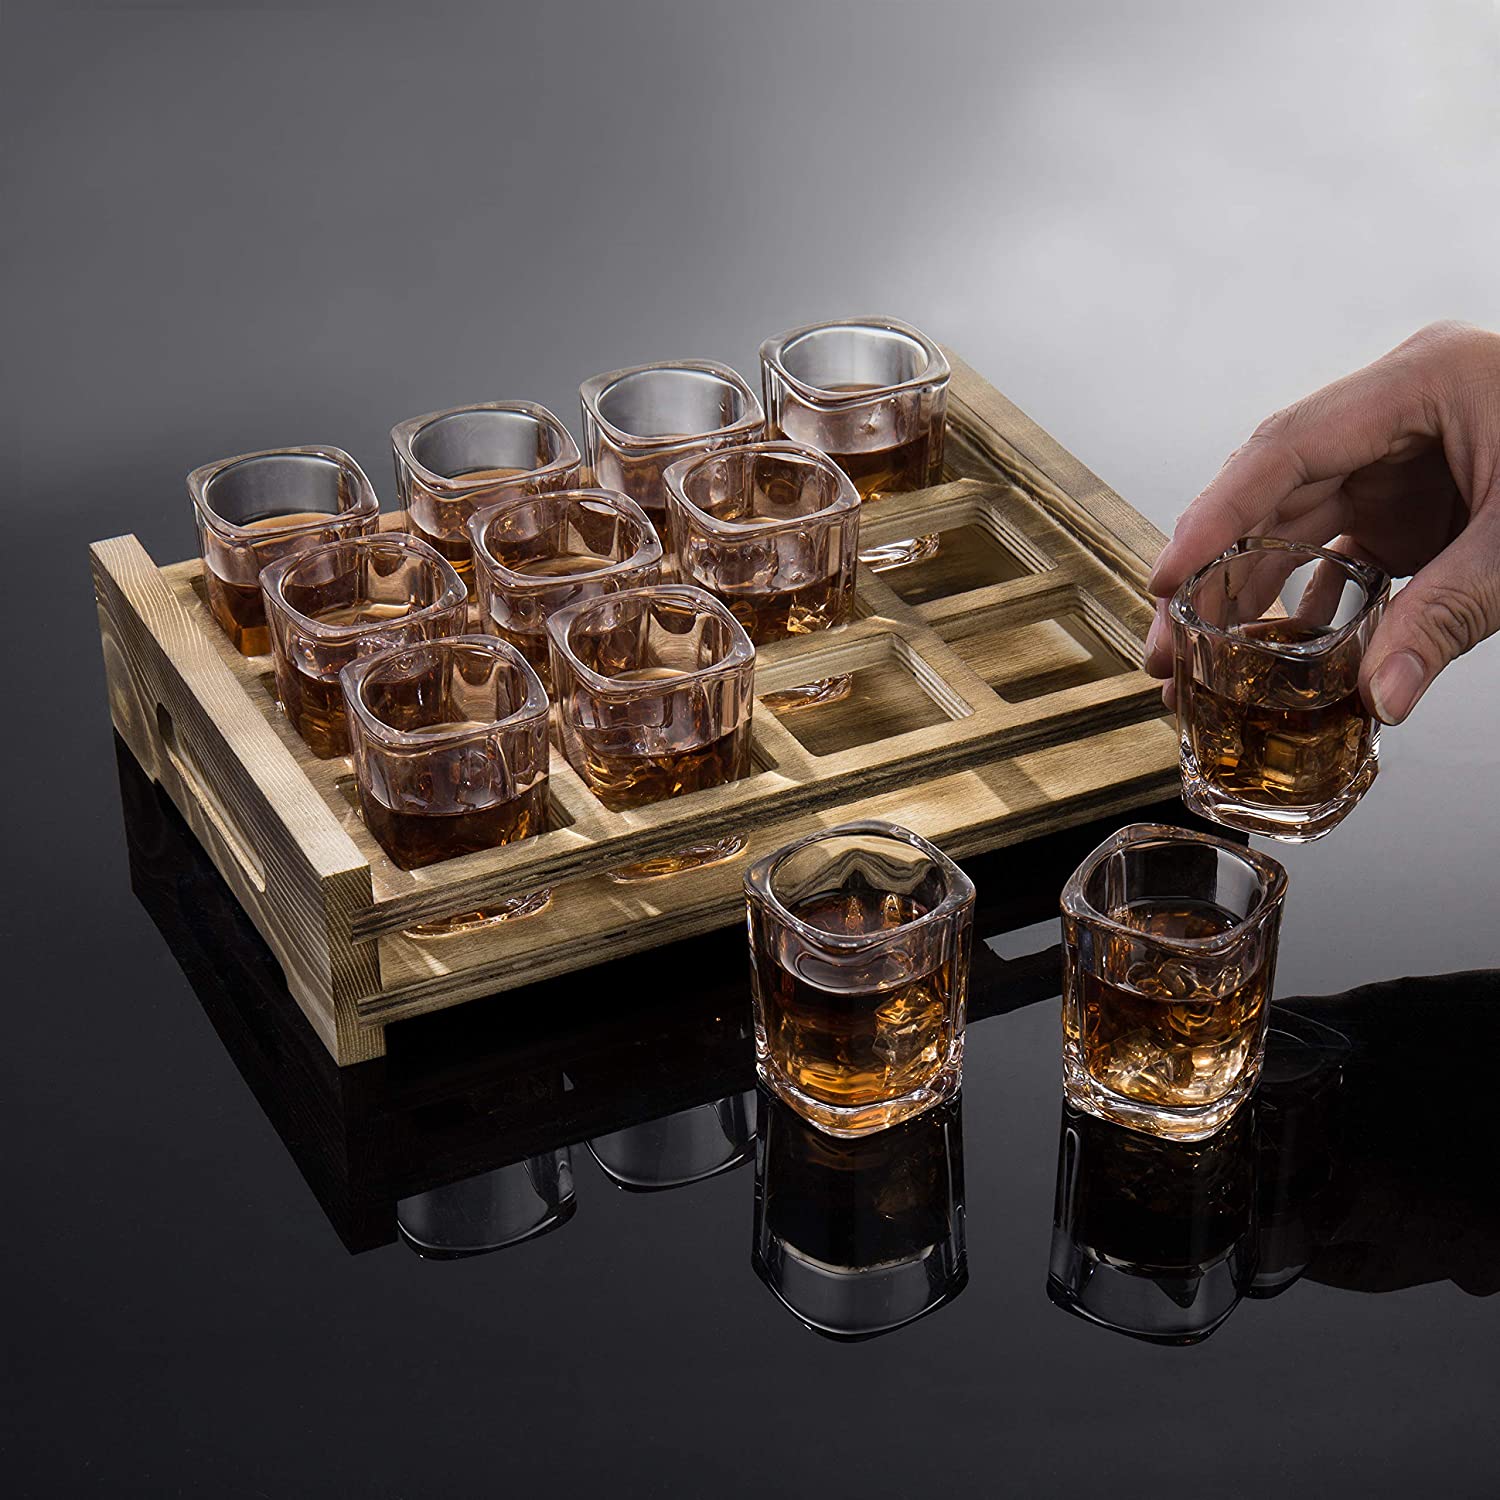 MyGift Rectangular Burnt Wood Tray with 12 Shot Glass, Brown - image 4 of 6